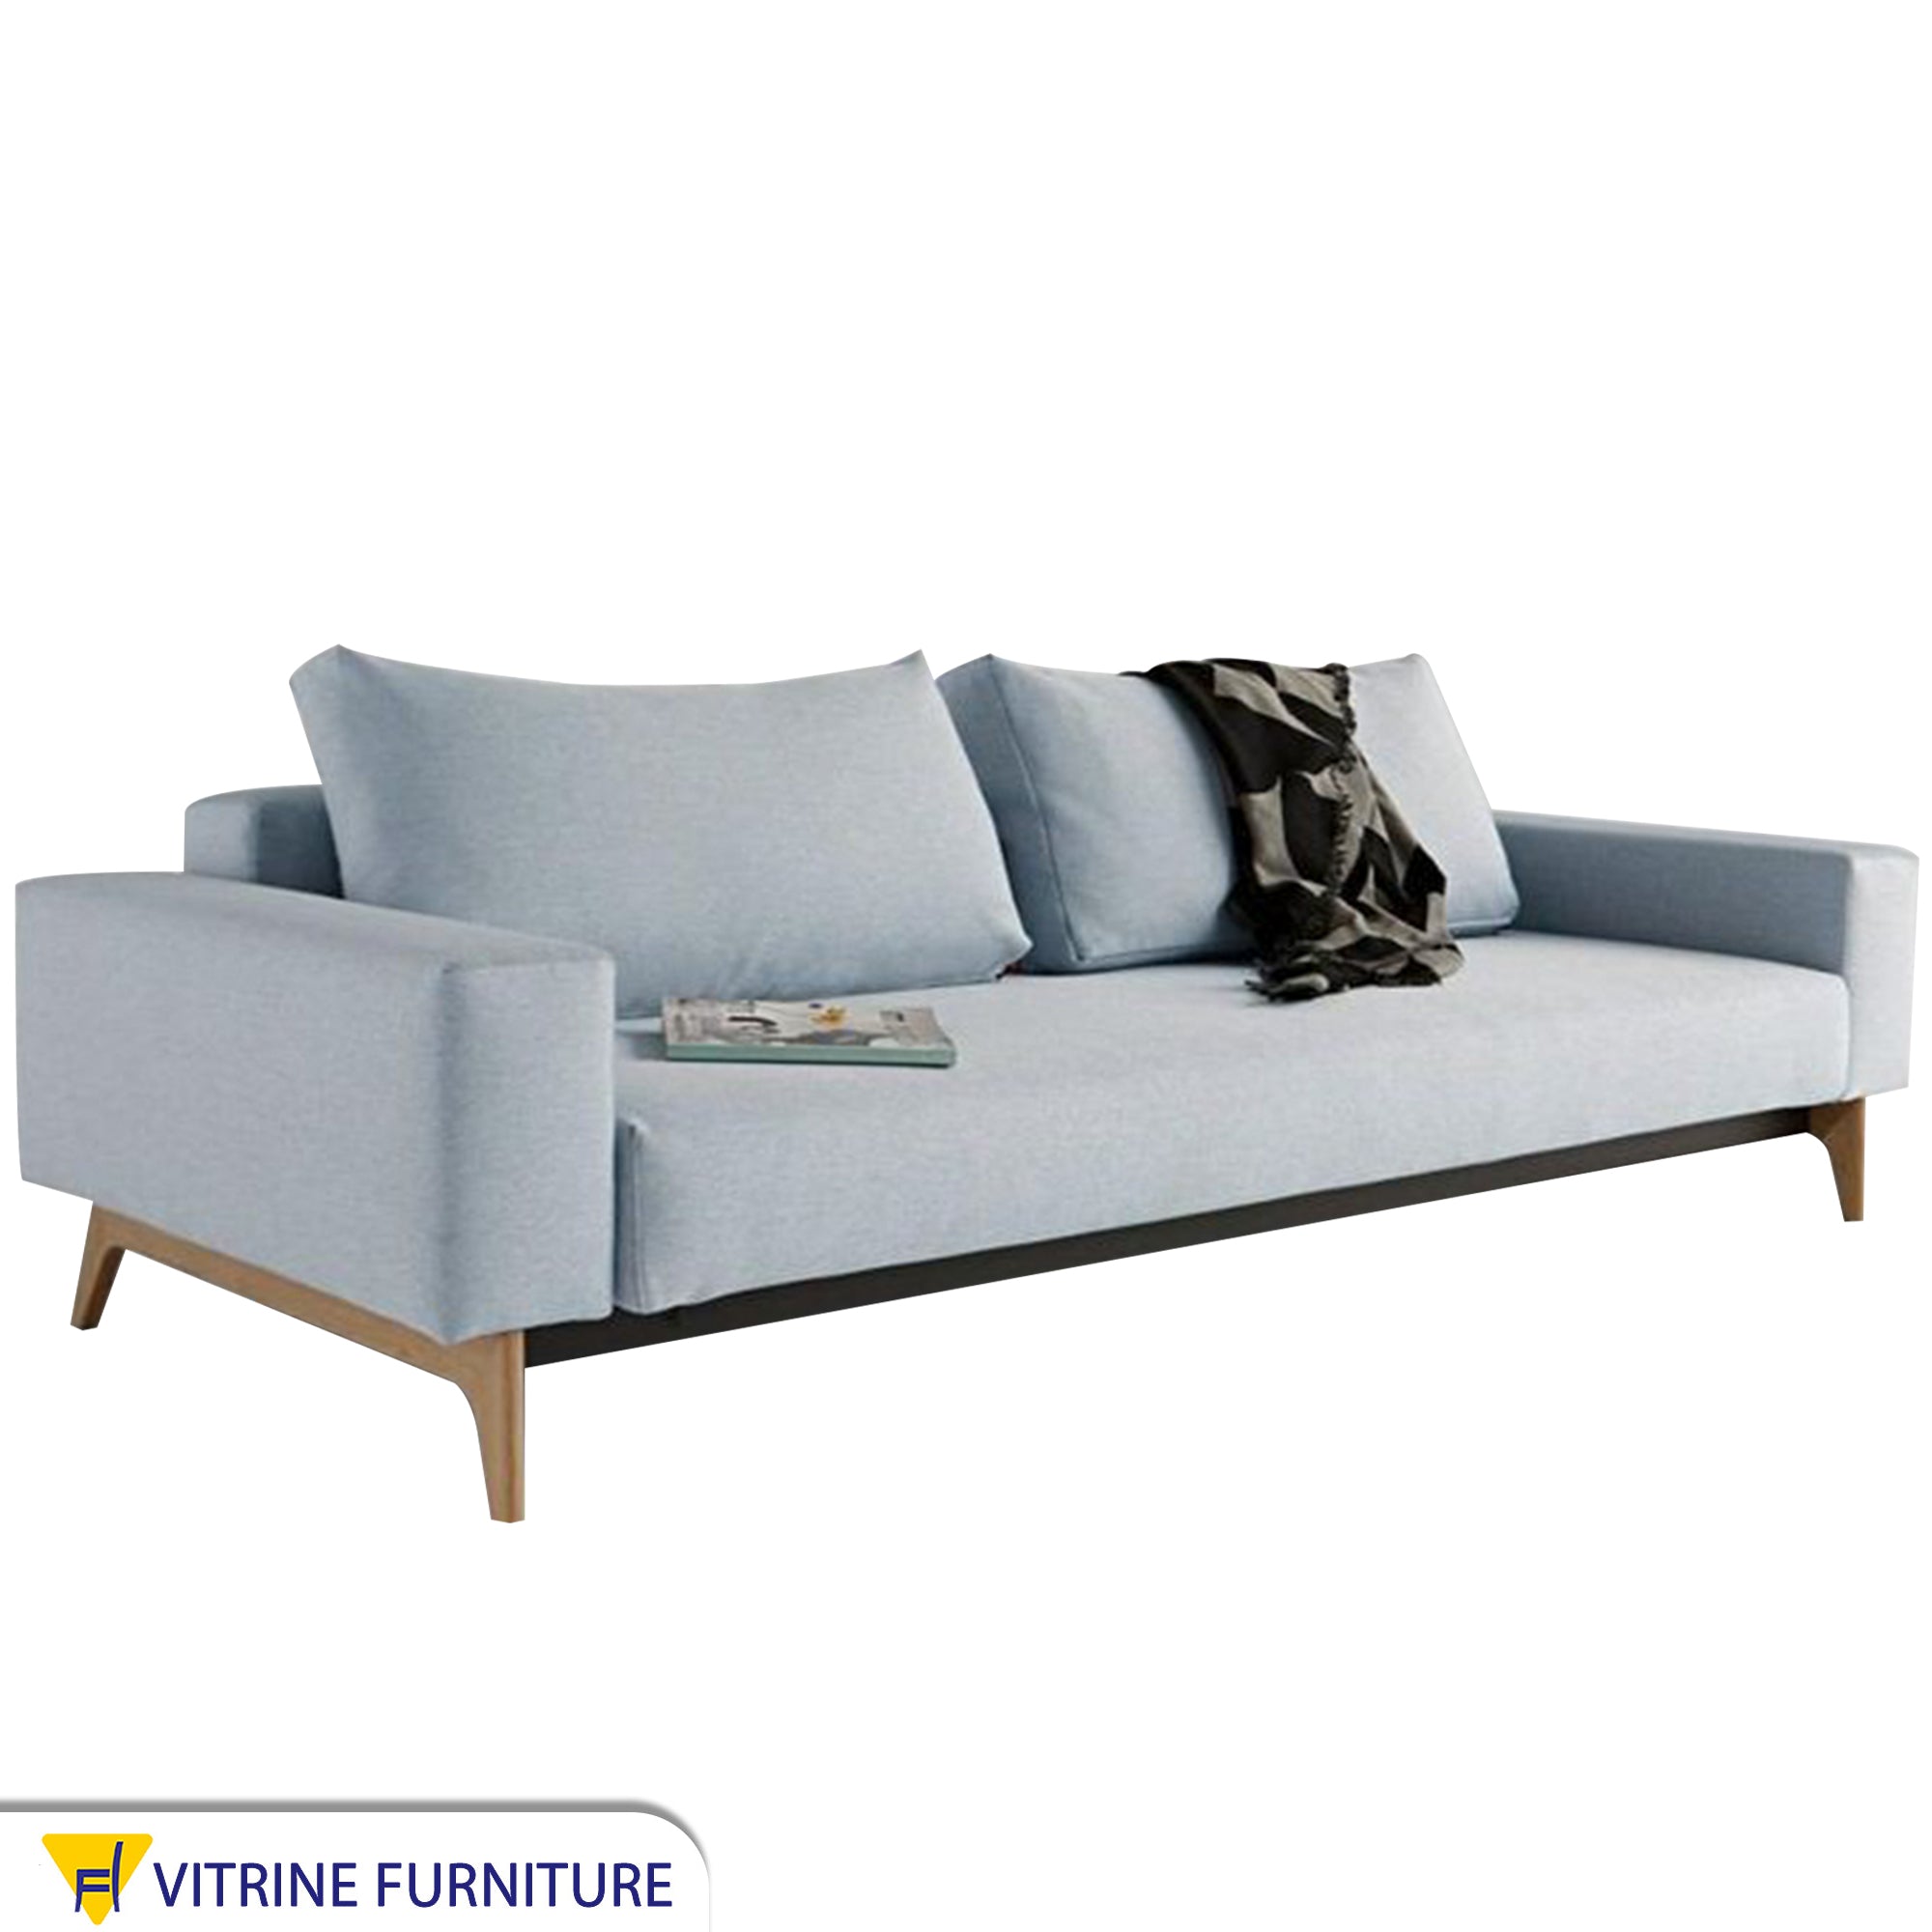 A sofa with great depth, Baby Blue